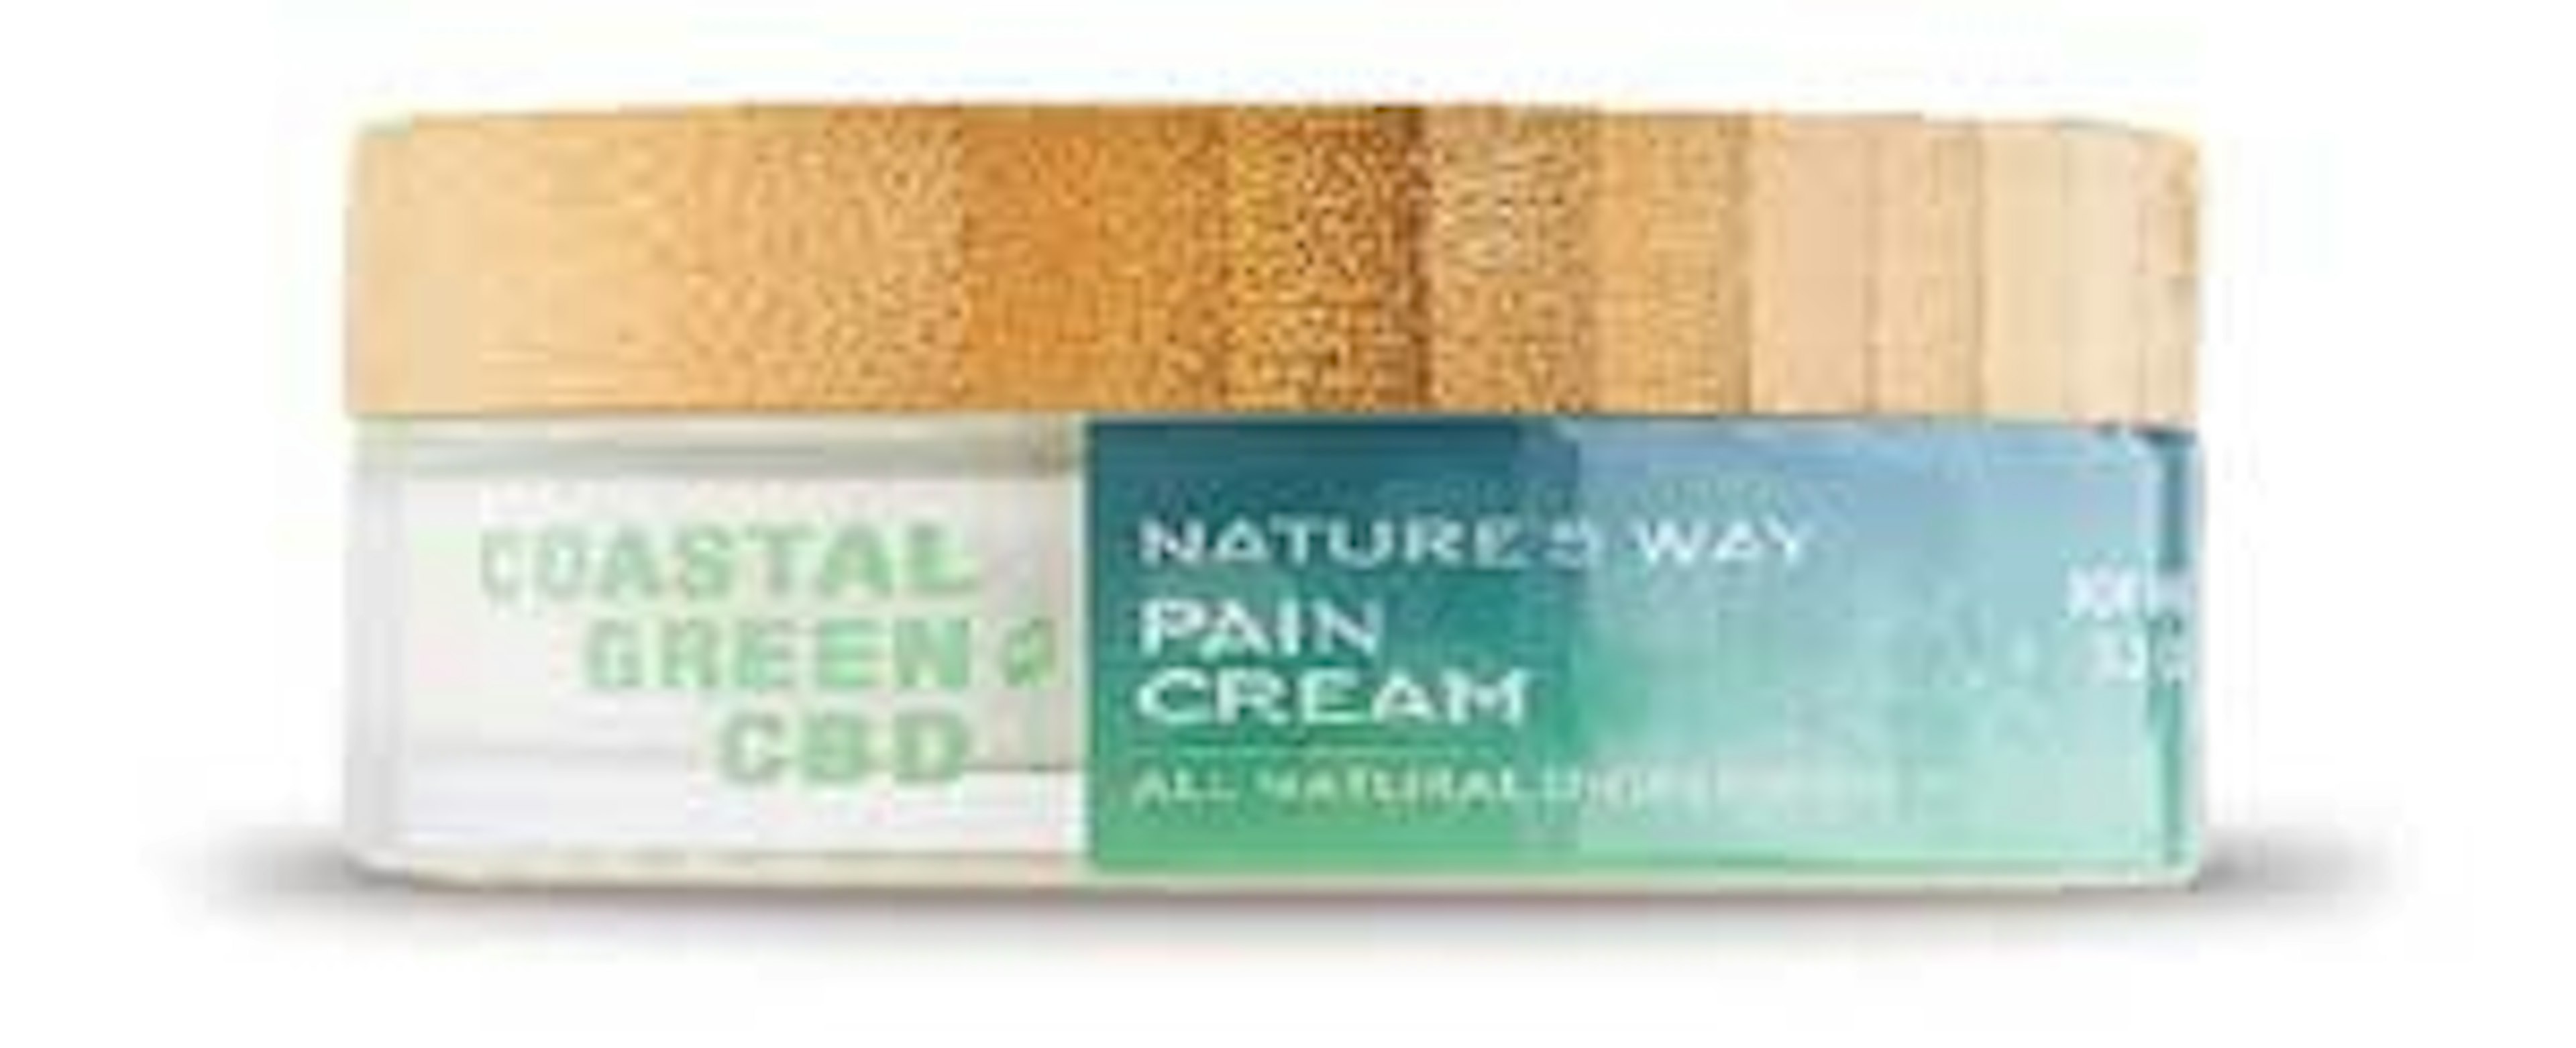 FREE CBD Pain Cream with any Purchase